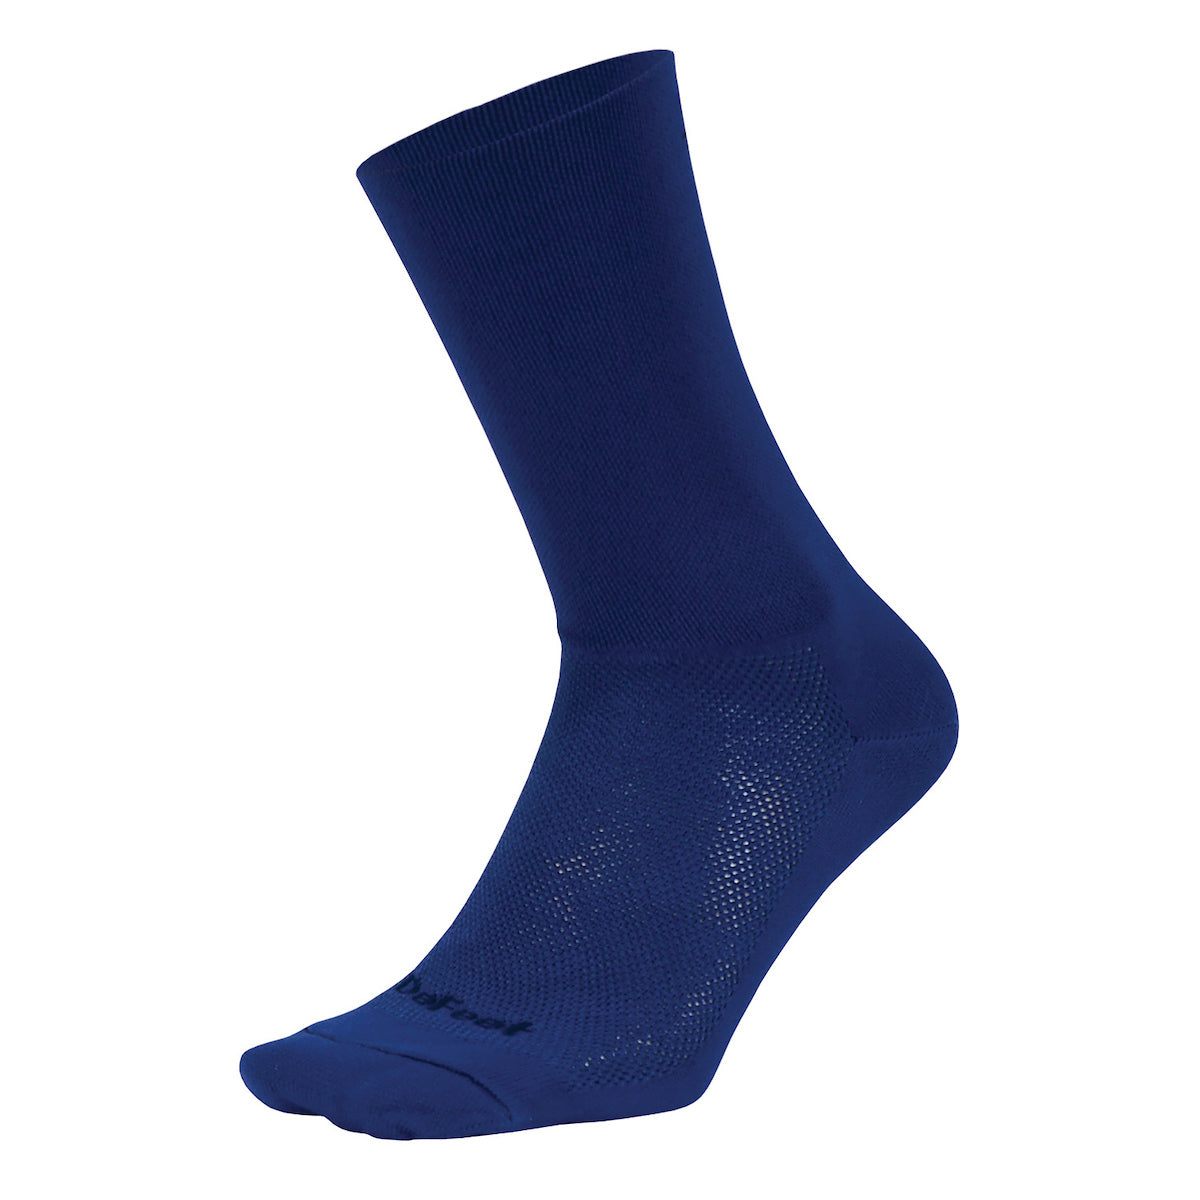 DeFeet Aireator 6" D-Logo cycling sock with 6" double cuff in navy